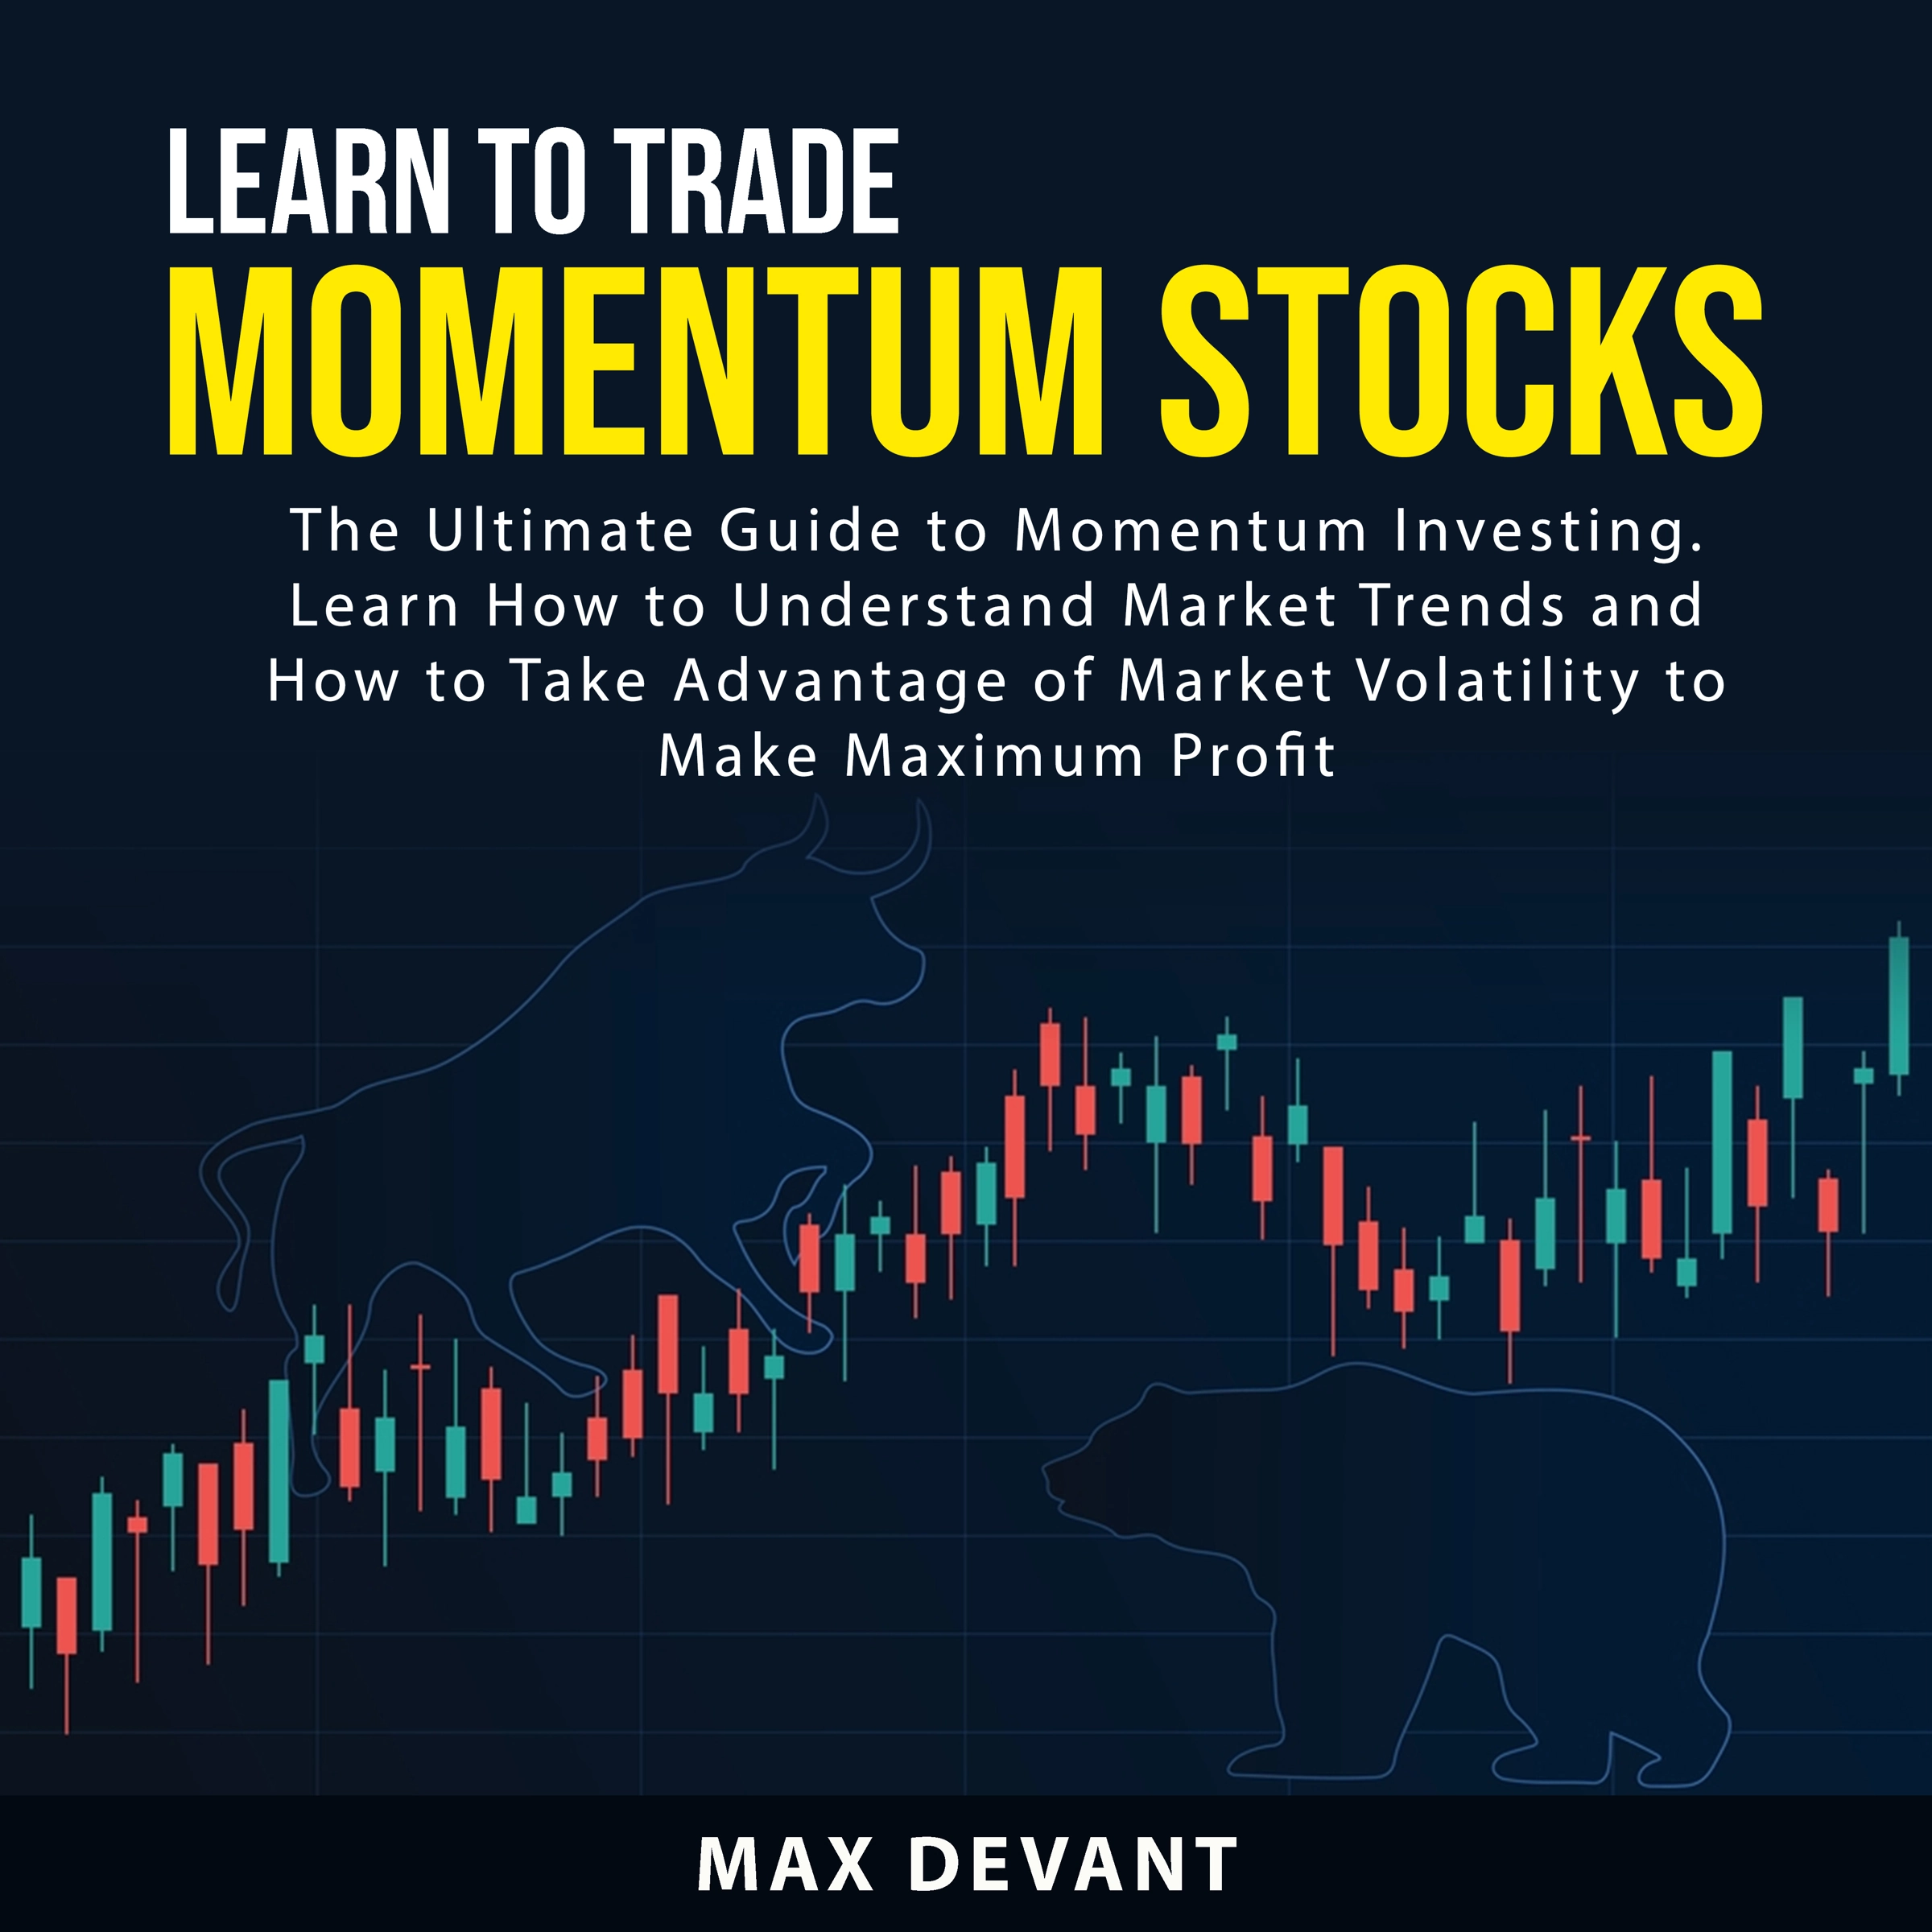 Learn to Trade Momentum Stocks Audiobook by Max Devant